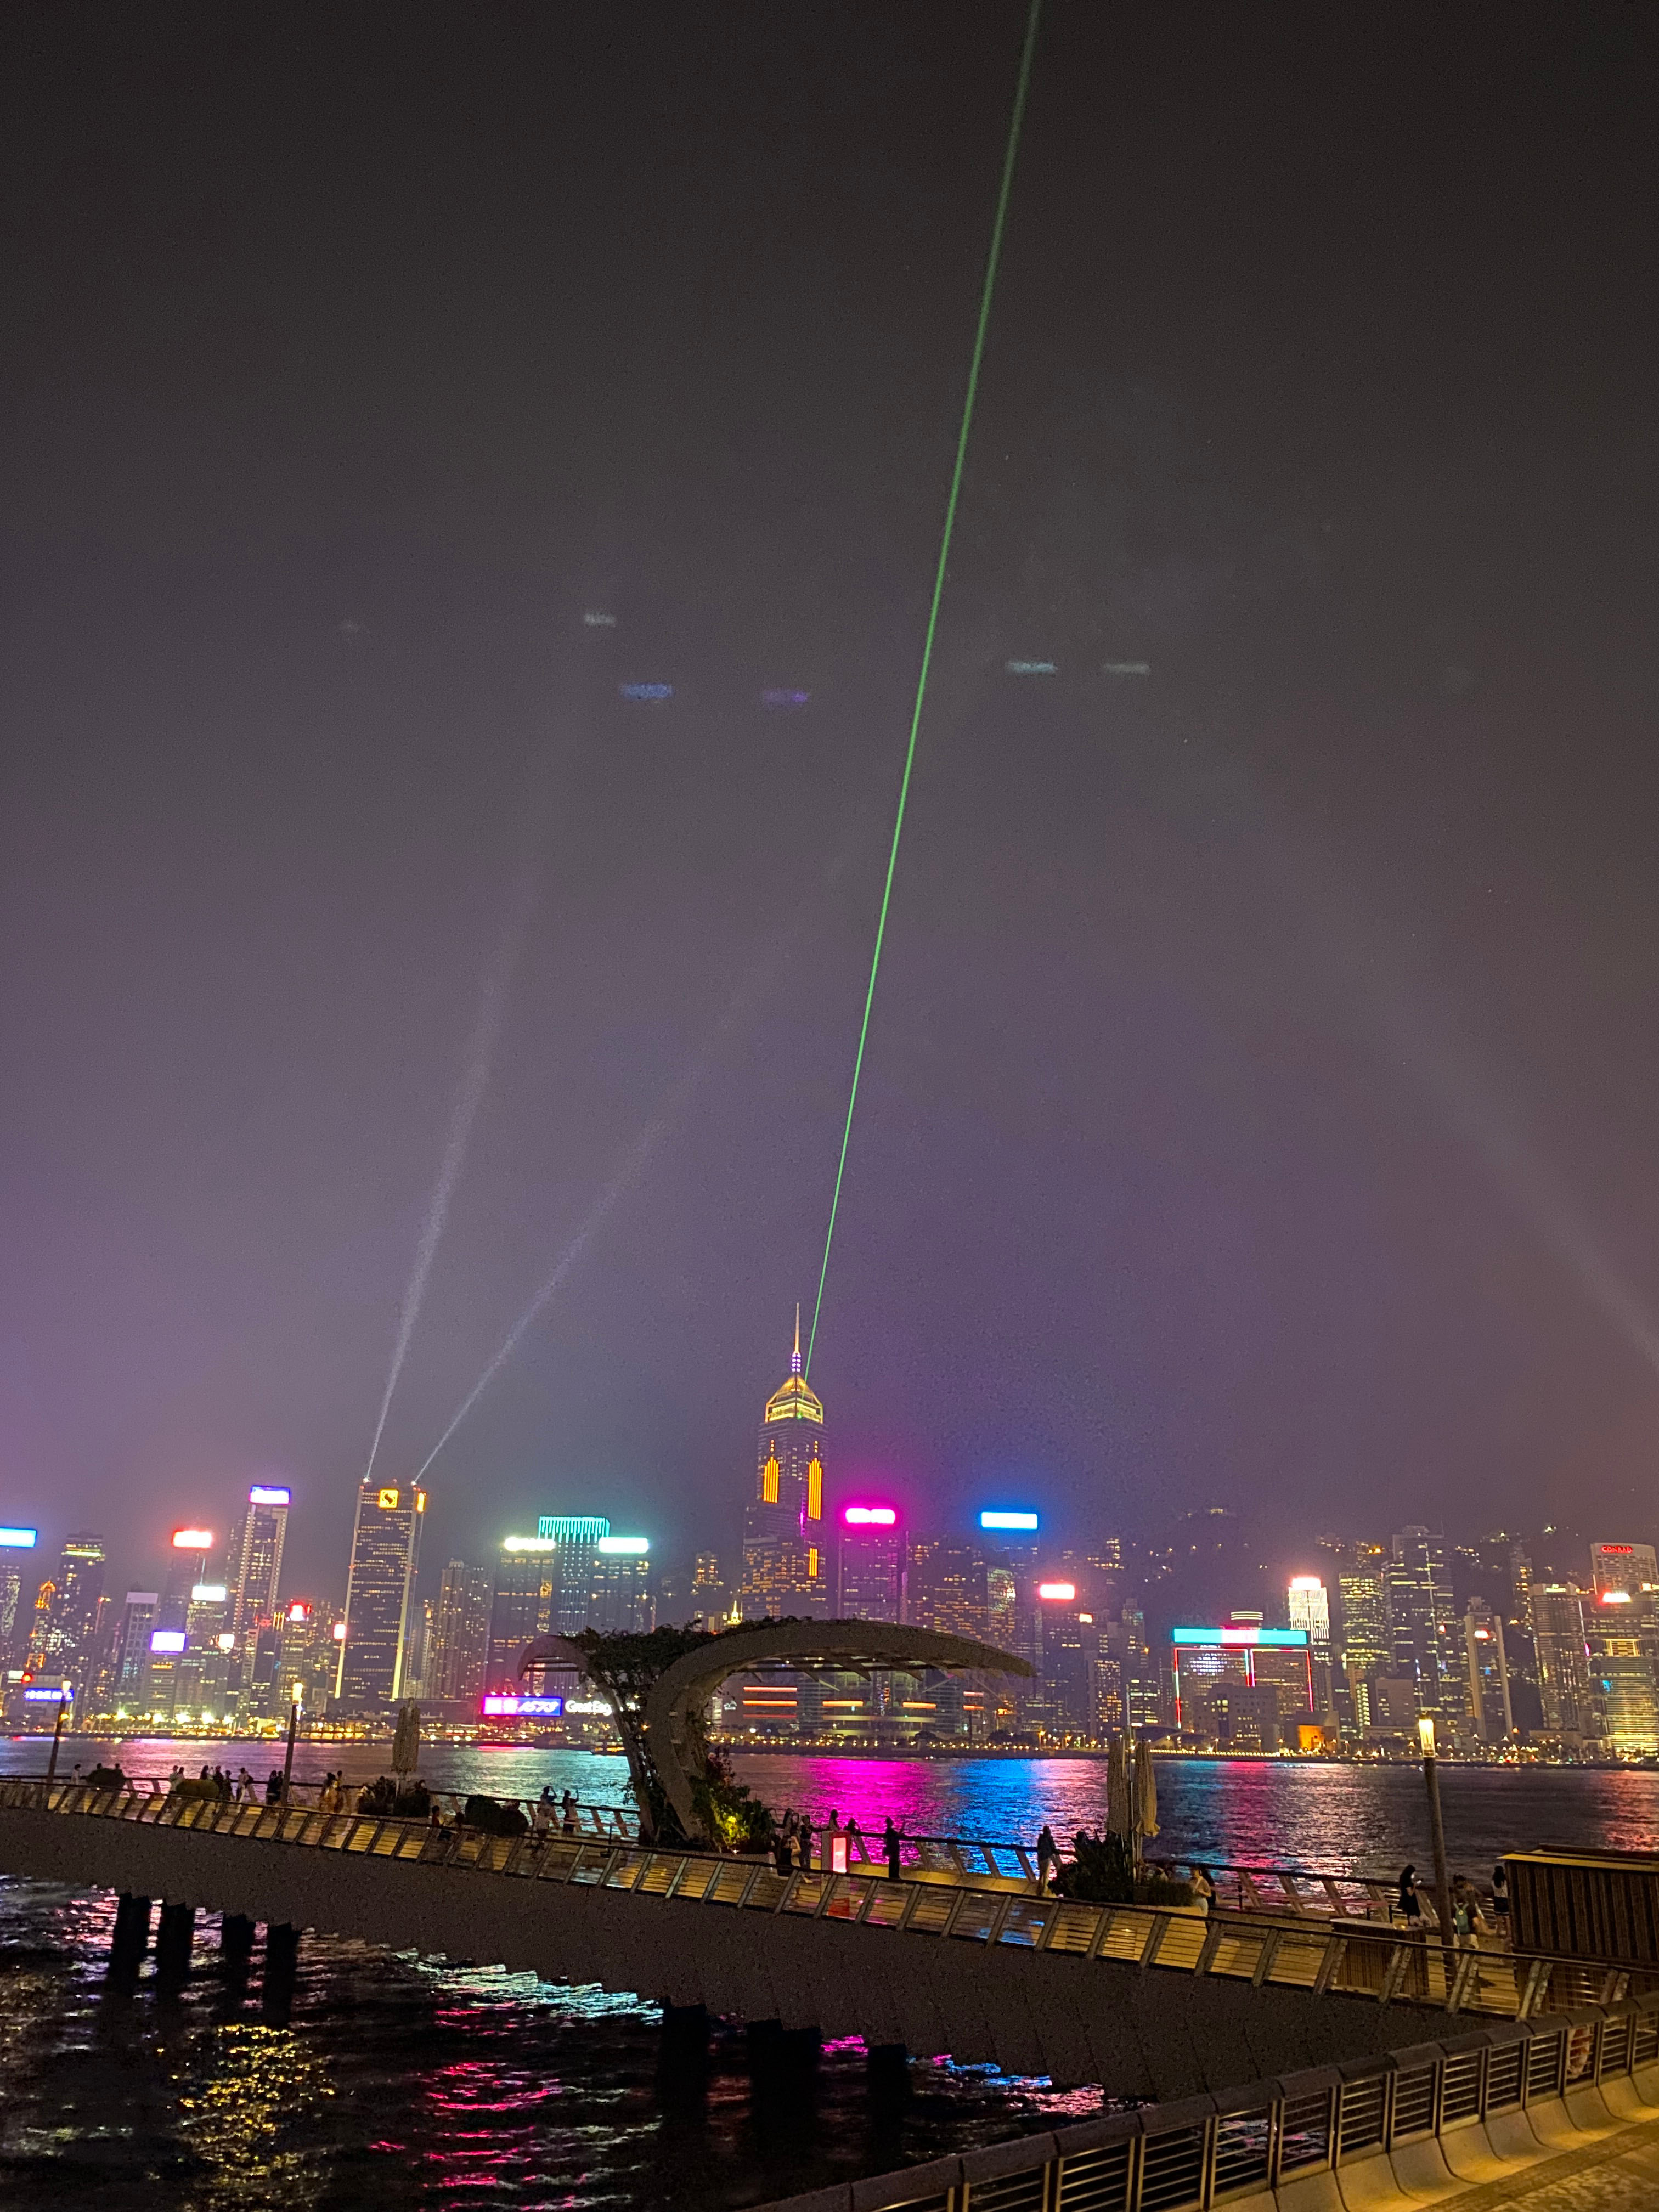 This was taken at avenue of stars in the Tsim Tsai Tsui neighbourhood during the daily light show..